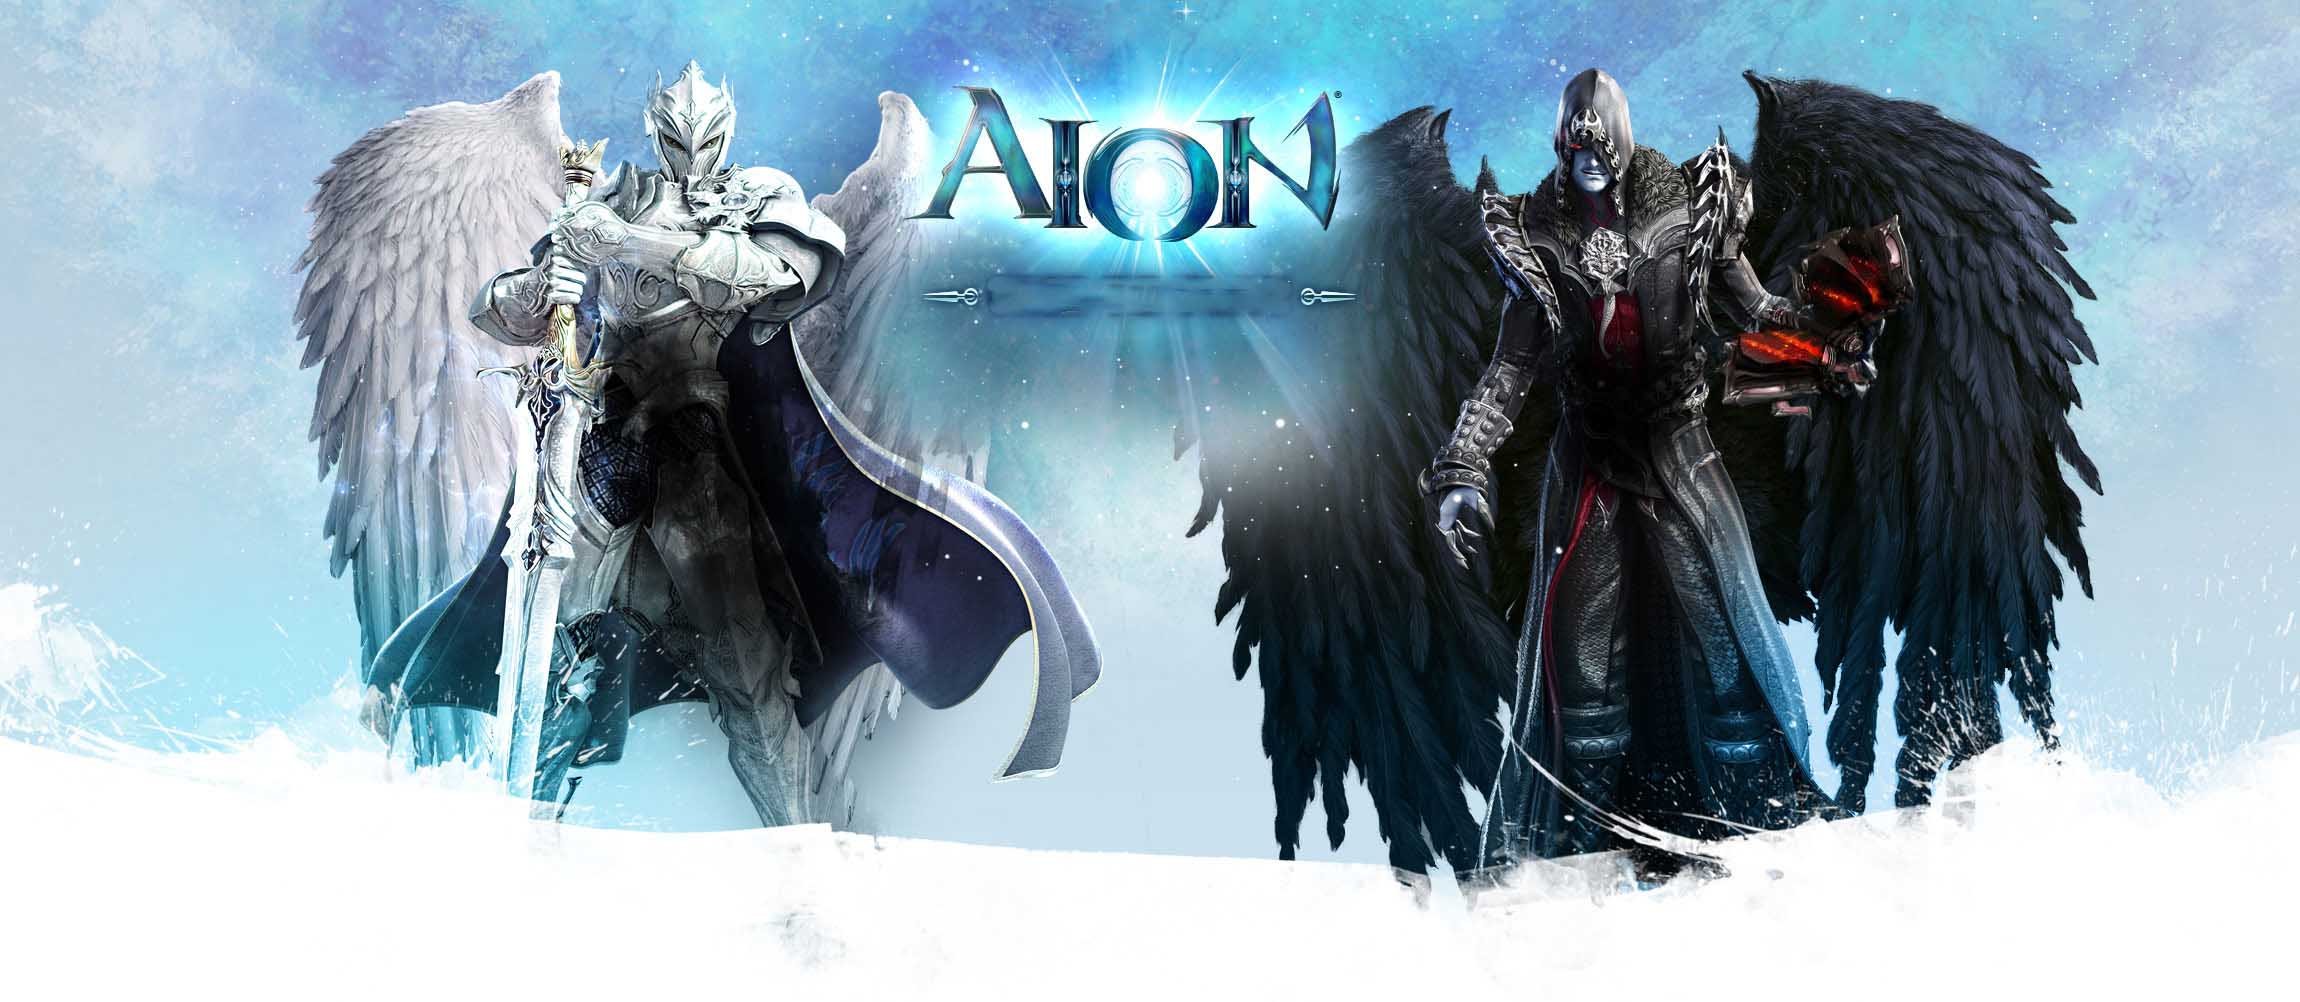 aion, Game, Video, Fantasy, Art, Artwork, Mmo, Online ...